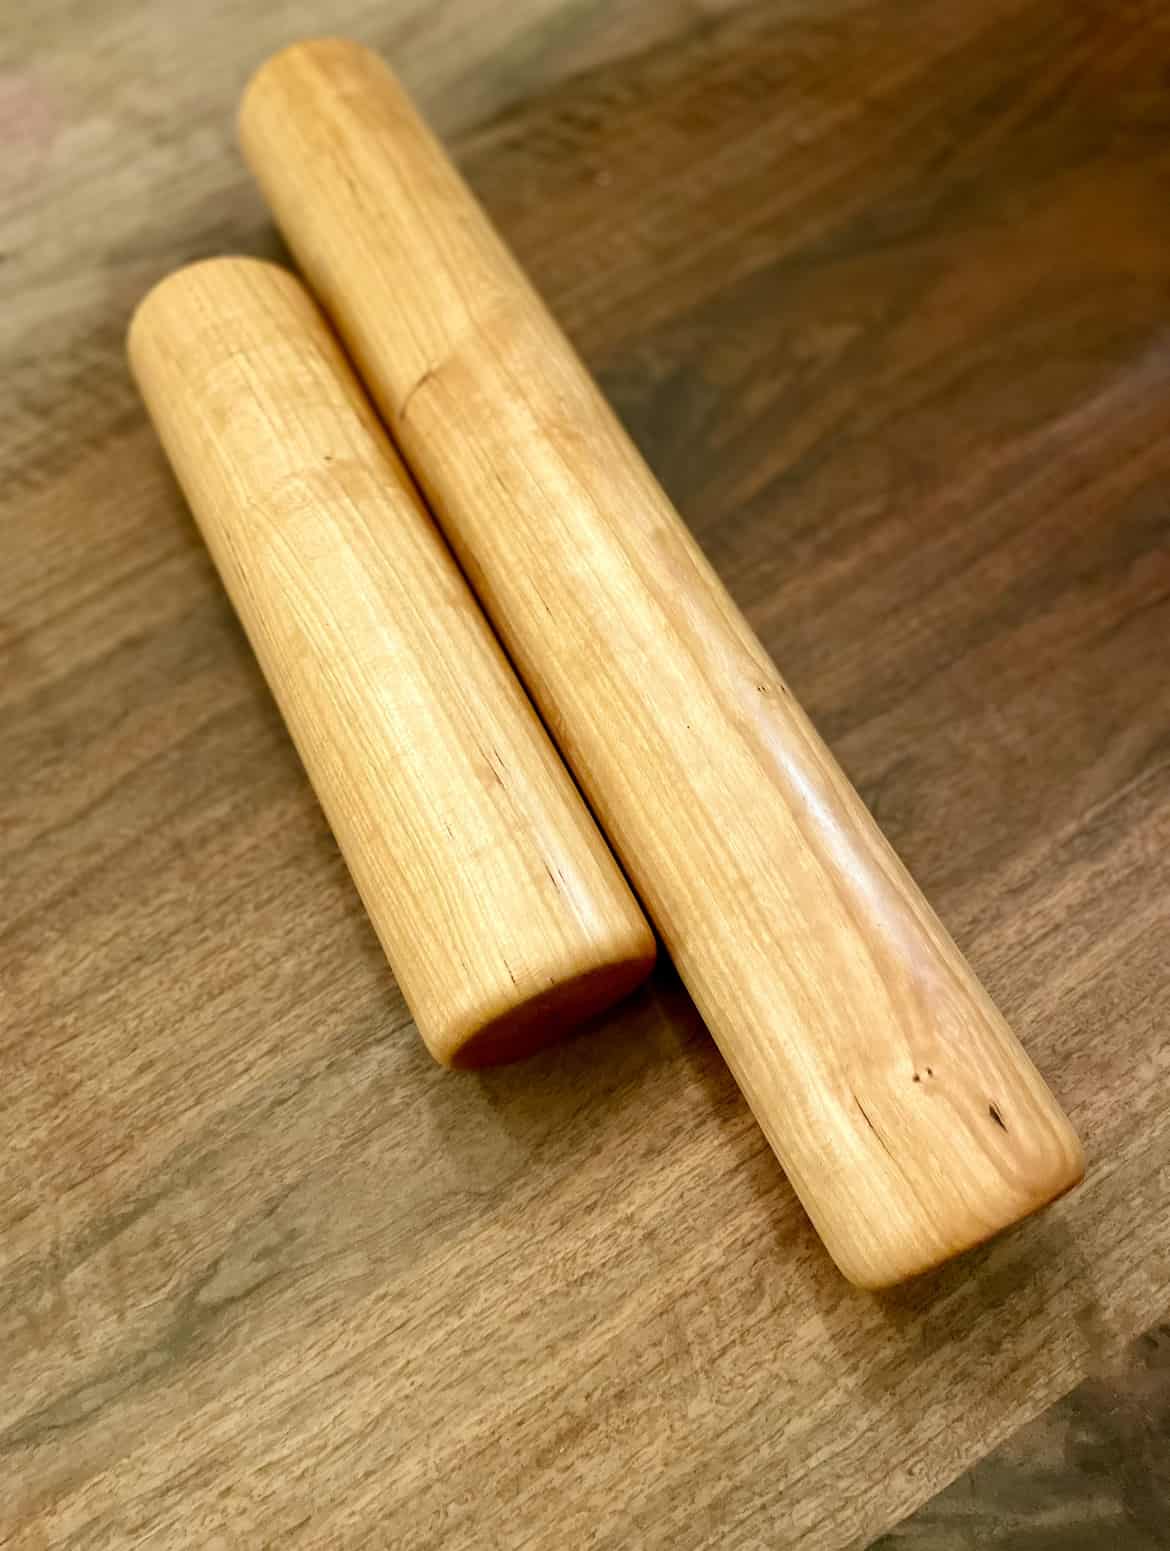 Handmade Oversized Rolling Pin in Oak, Maple, Walnut, and Cherry | Clines Crafted Woodworking, Georgetown, KY - Clines Crafted Woodworking LLC